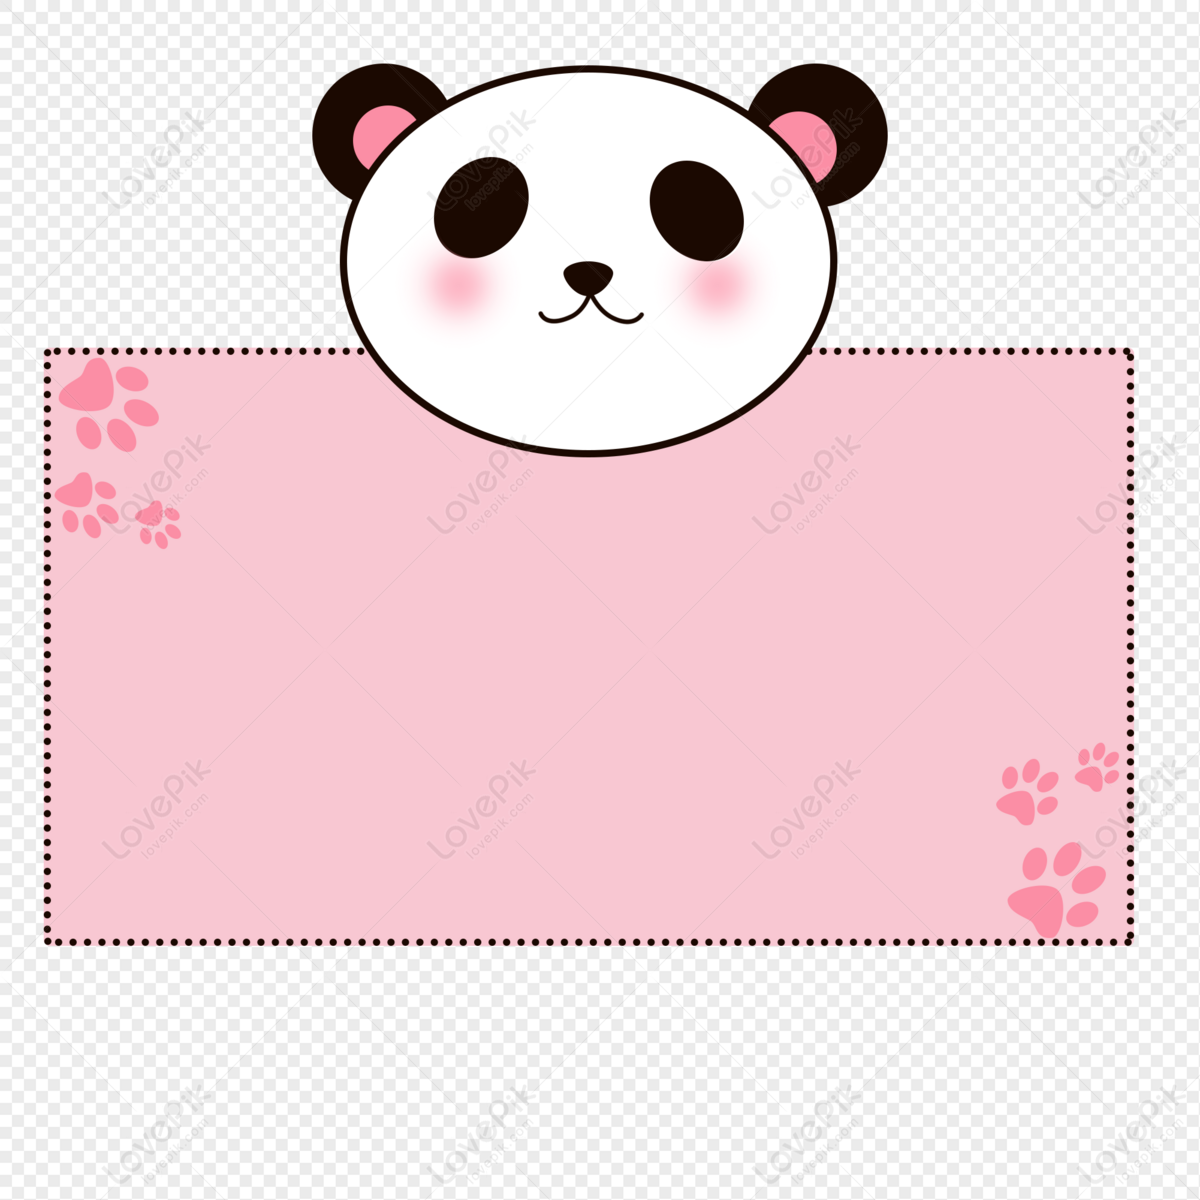 Cute Little Panda Border Animal Note Paper PNG Transparent And Clipart  Image For Free Download - Lovepik | 401492516